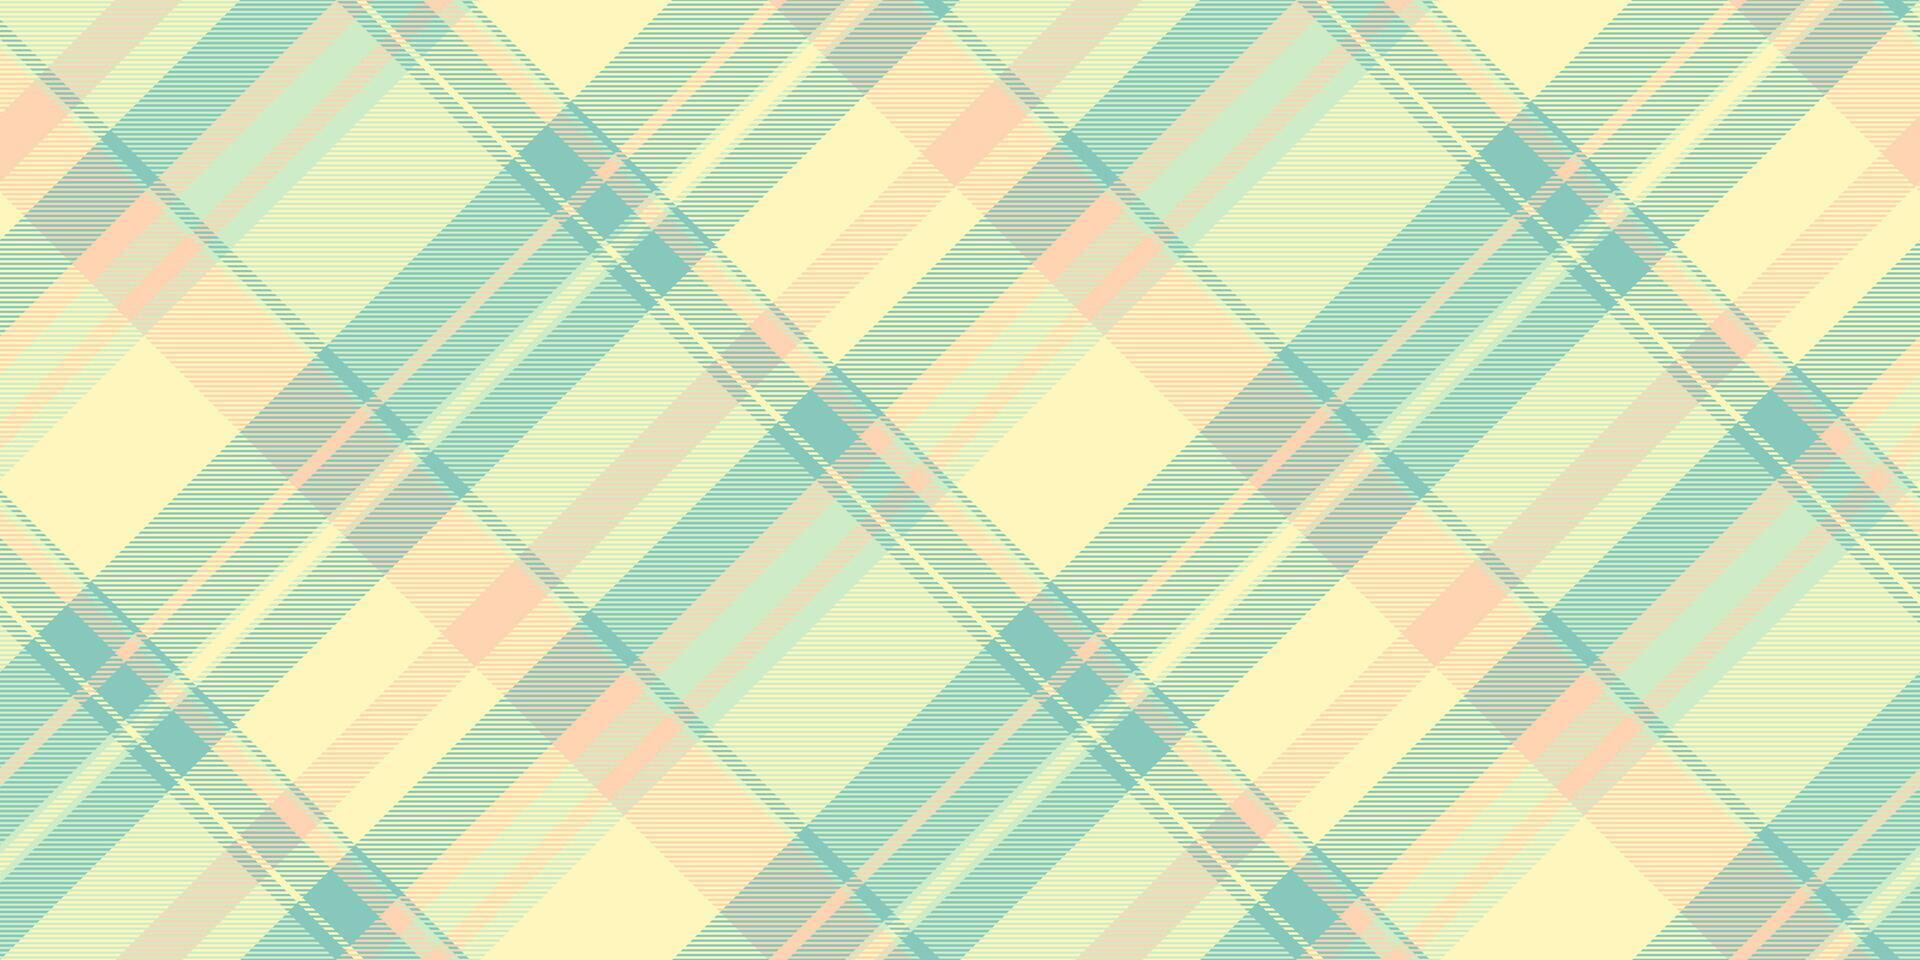 Baby fabric check pattern, glamour texture vector background. Valentine plaid seamless textile tartan in light and teal colors.